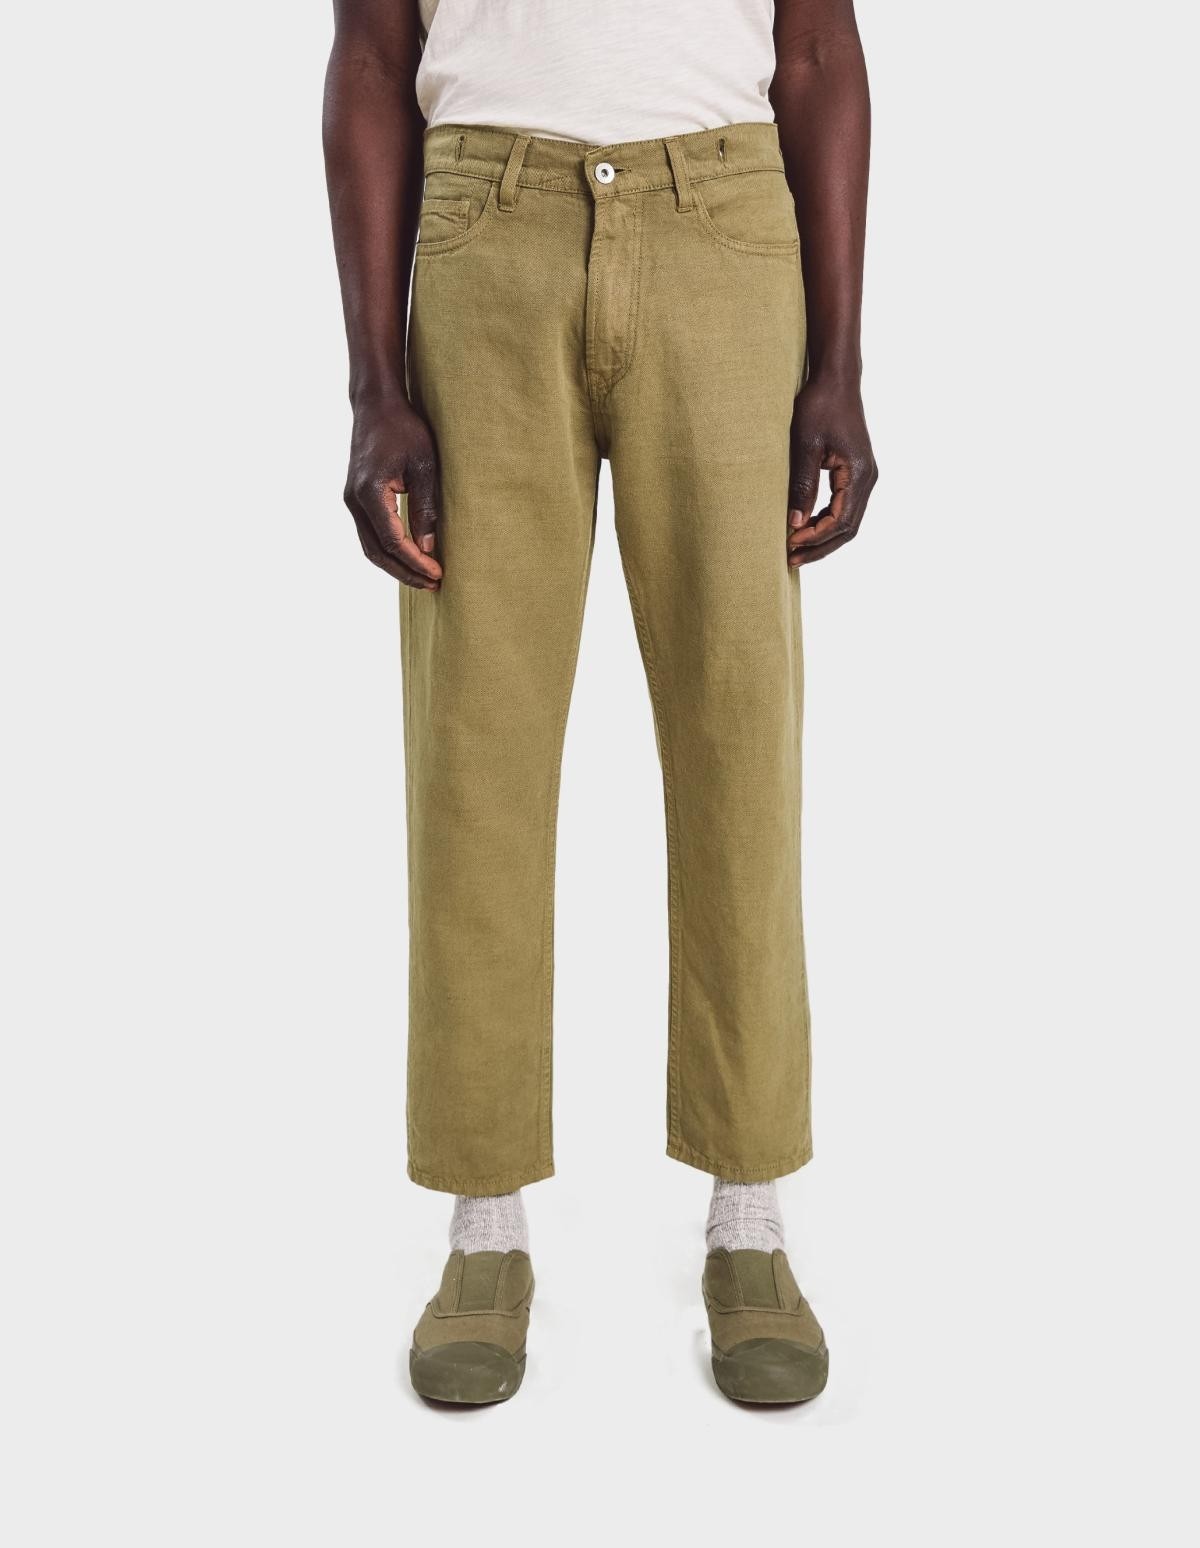 YMC You Must Create Tearaway Jean in Olive